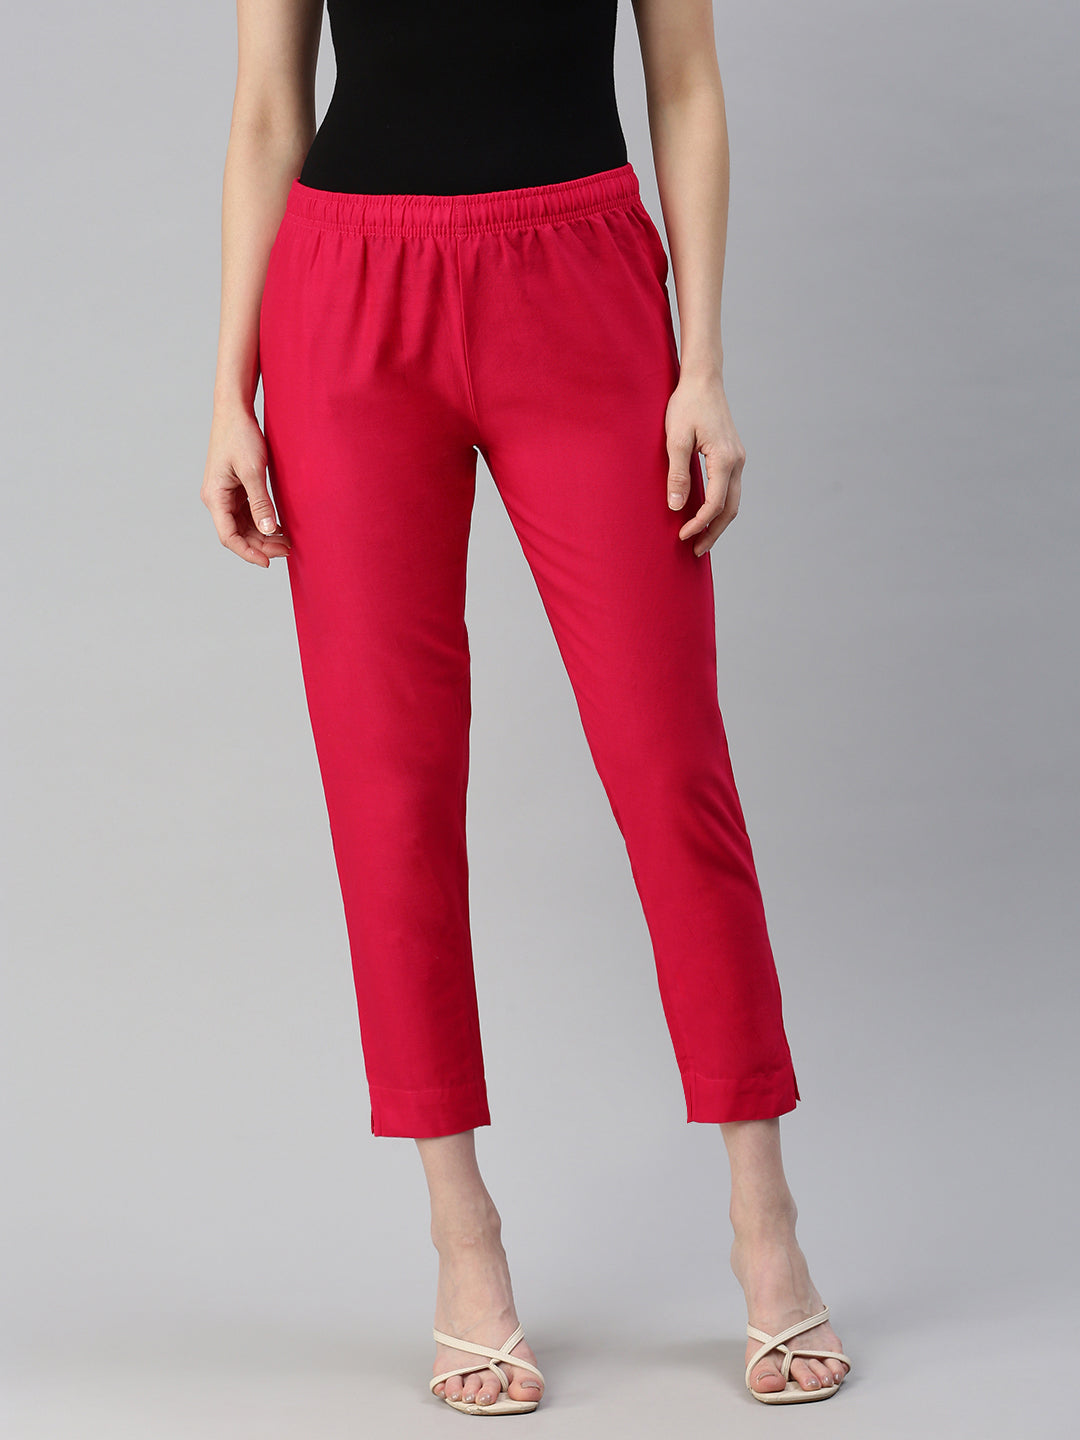 Cigarette Fitted Pants - Buy Indo Western Fitted Pants Online for Women in  India - Indya